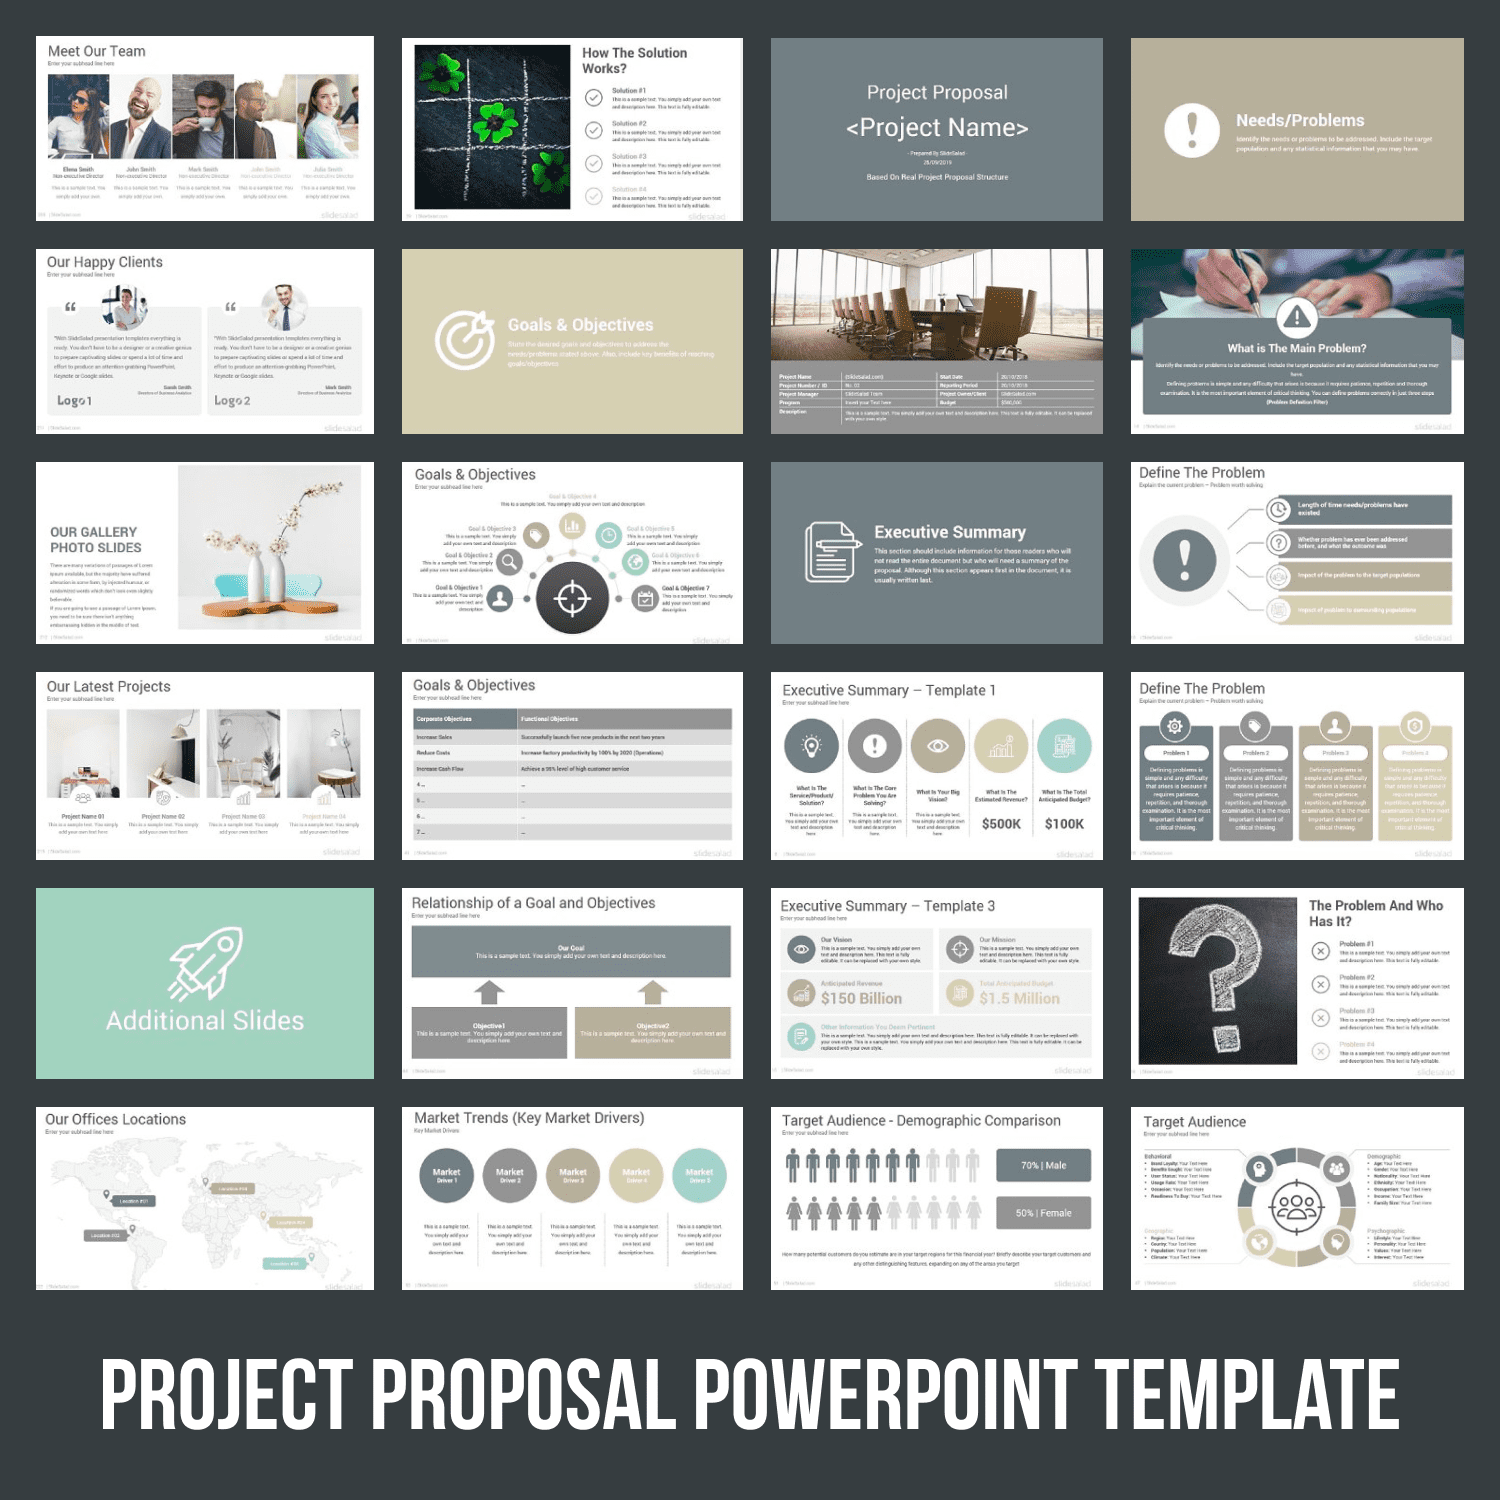 Project Proposal PowerPoint Template by MasterBundles.